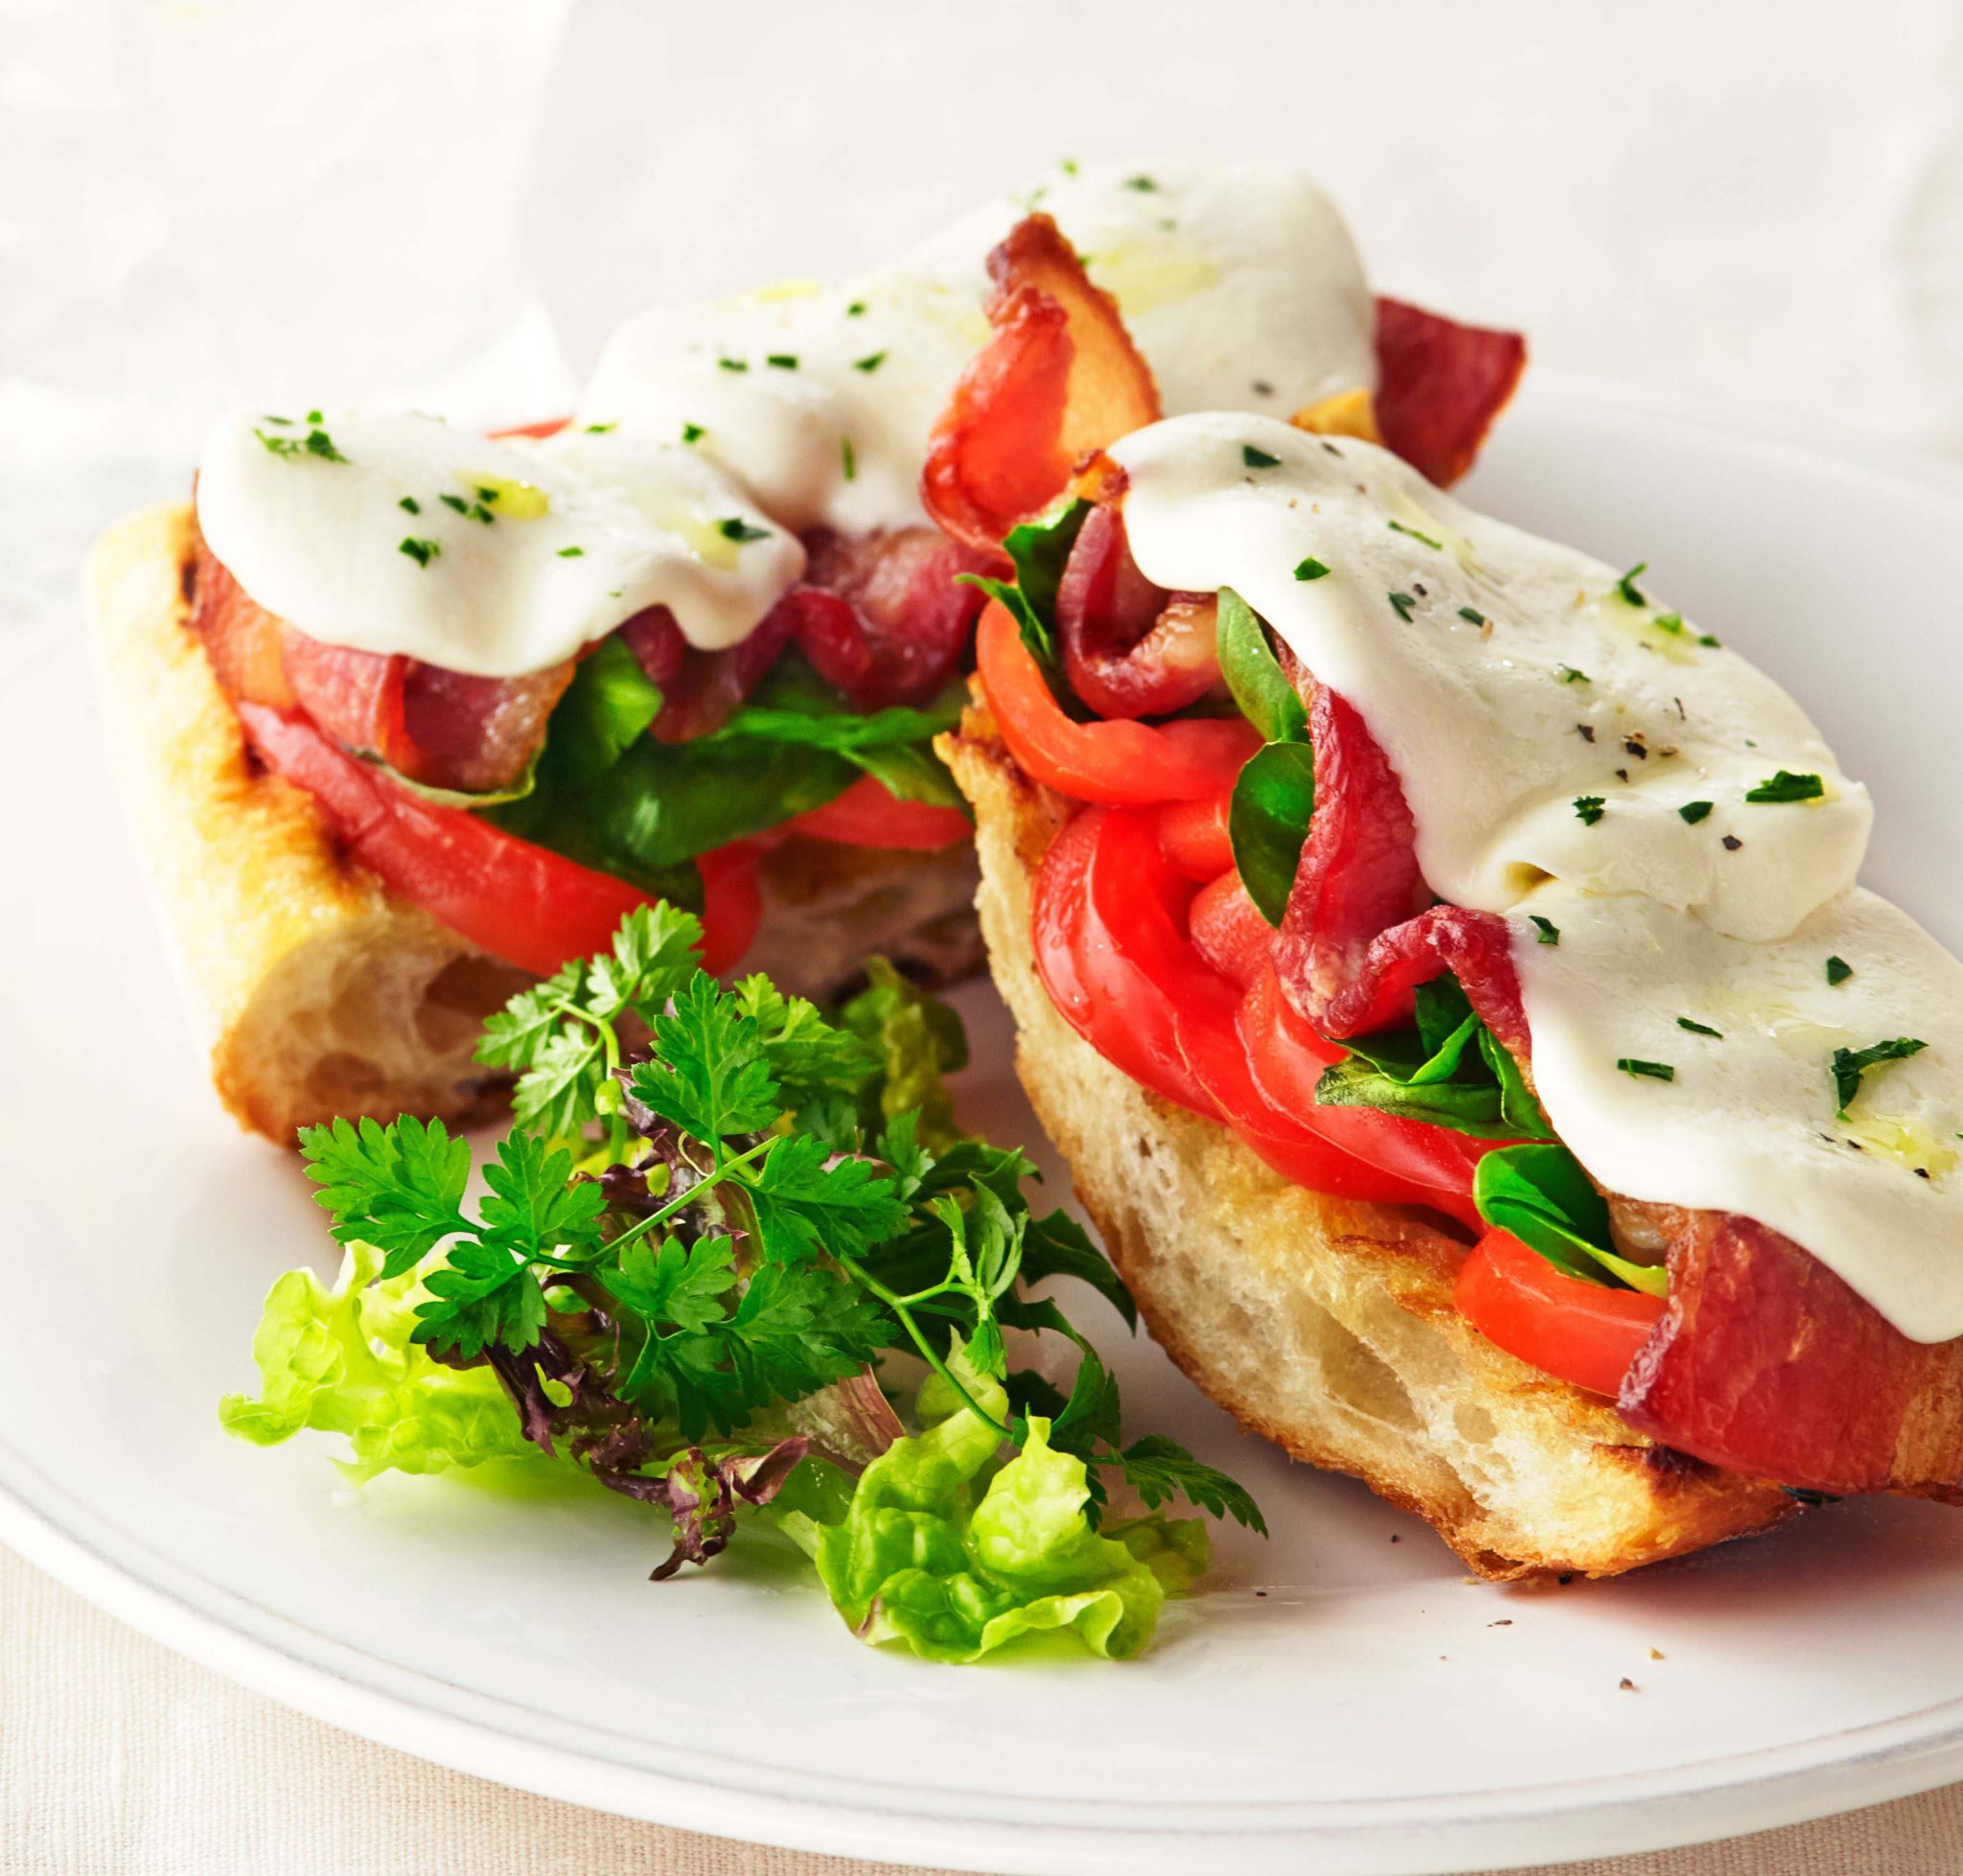 Bacon and Balsamic Caprese Grillbread